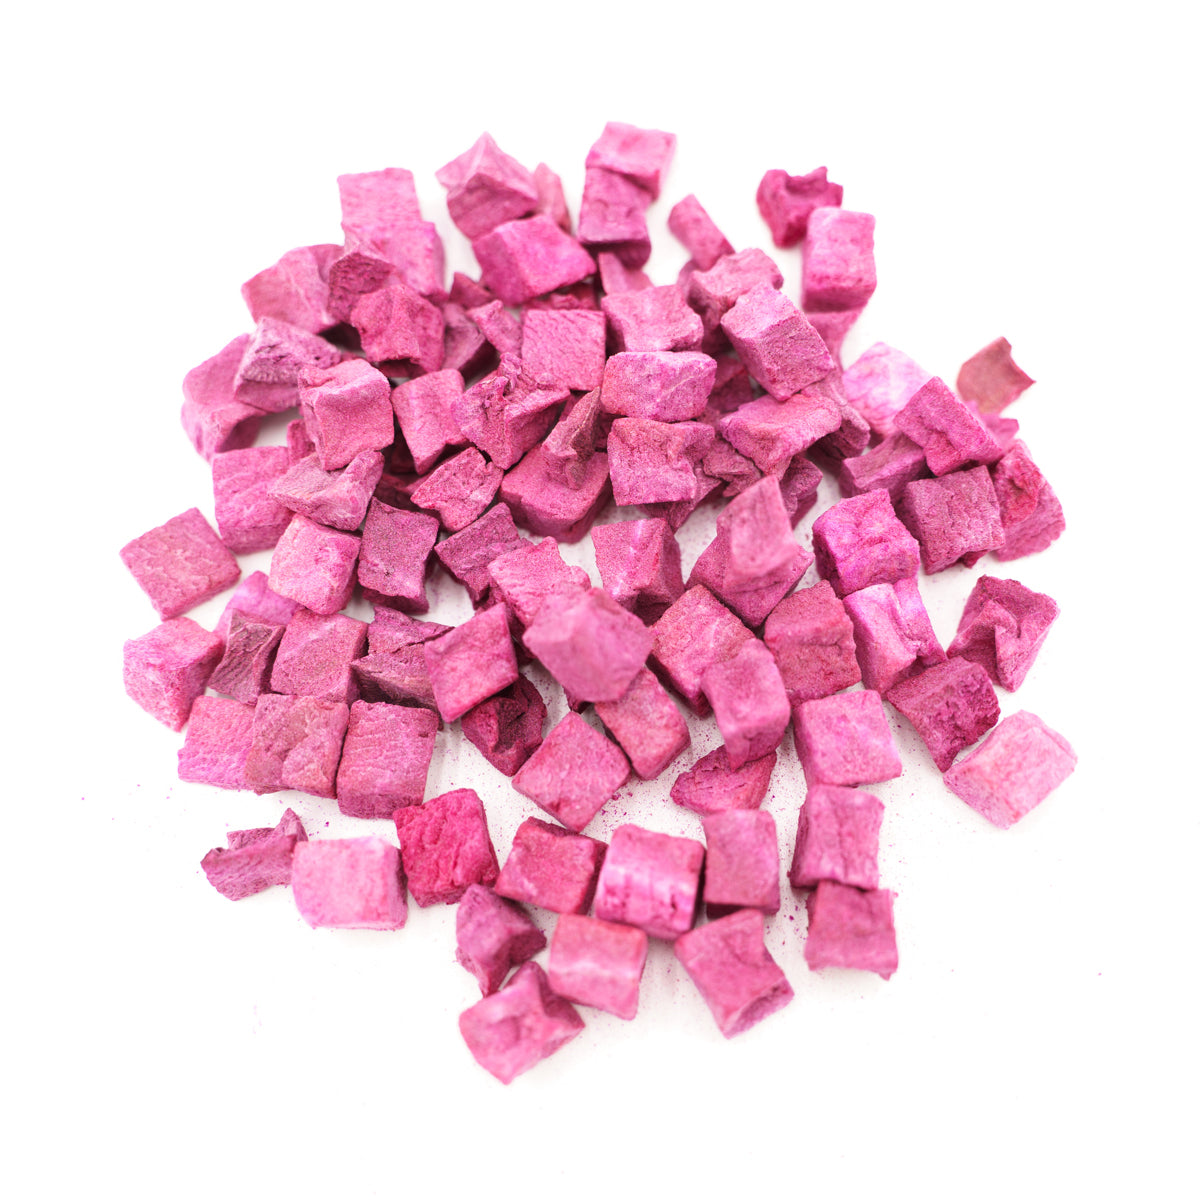 VFD Freeze Dried Beets Diced